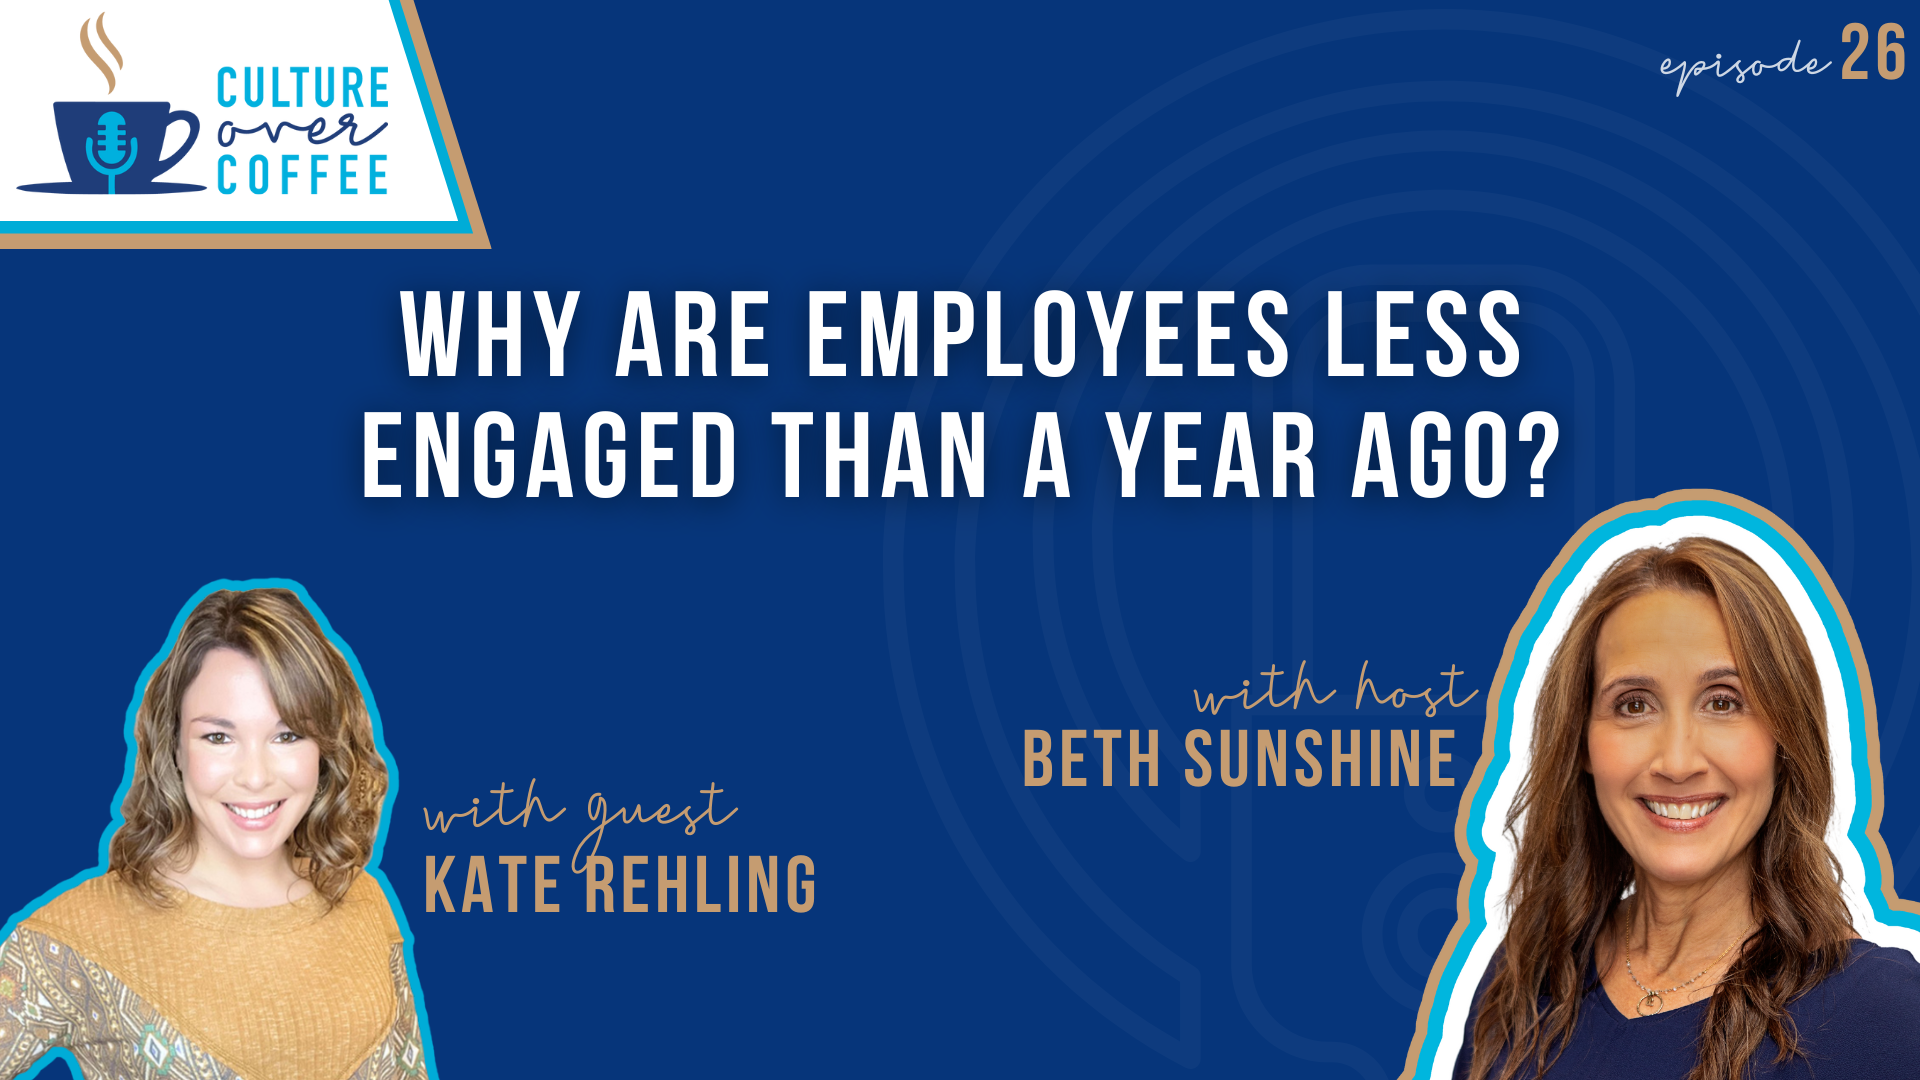 Why Are Employees Less Engaged Than a Year Ago? With Kate Rehling